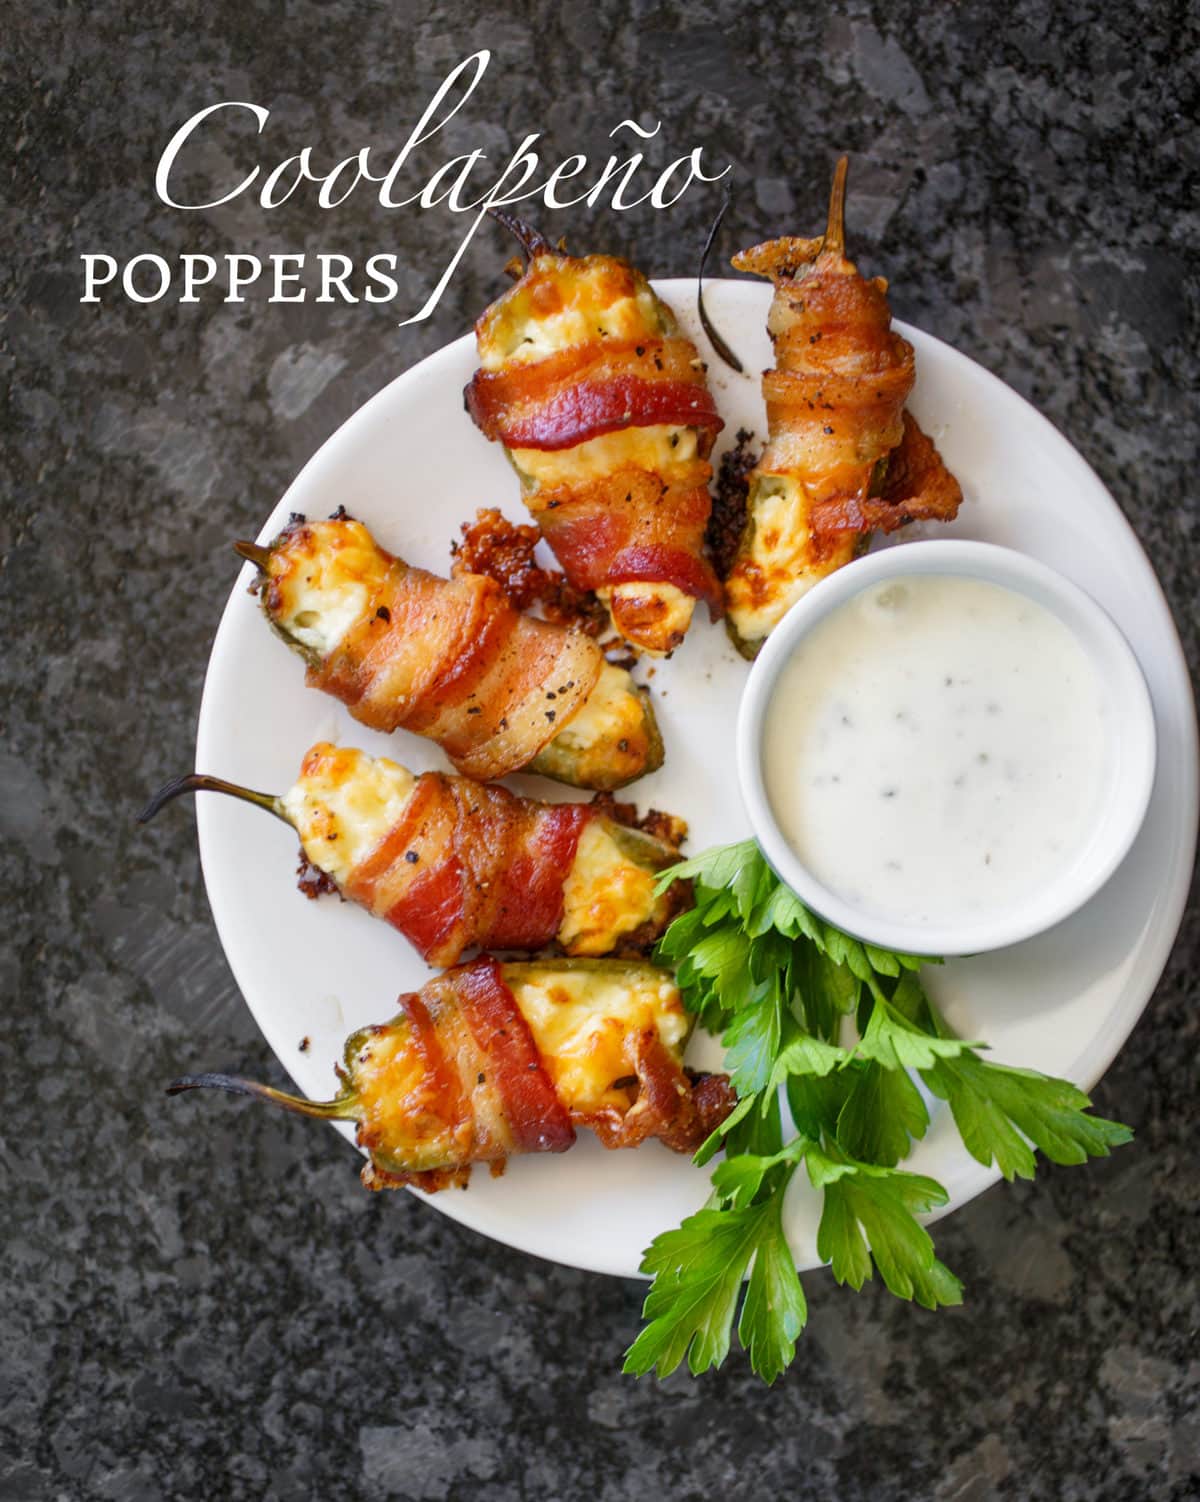 Coolapeno Jalapeño Poppers with bacon and ranch dressing on the side